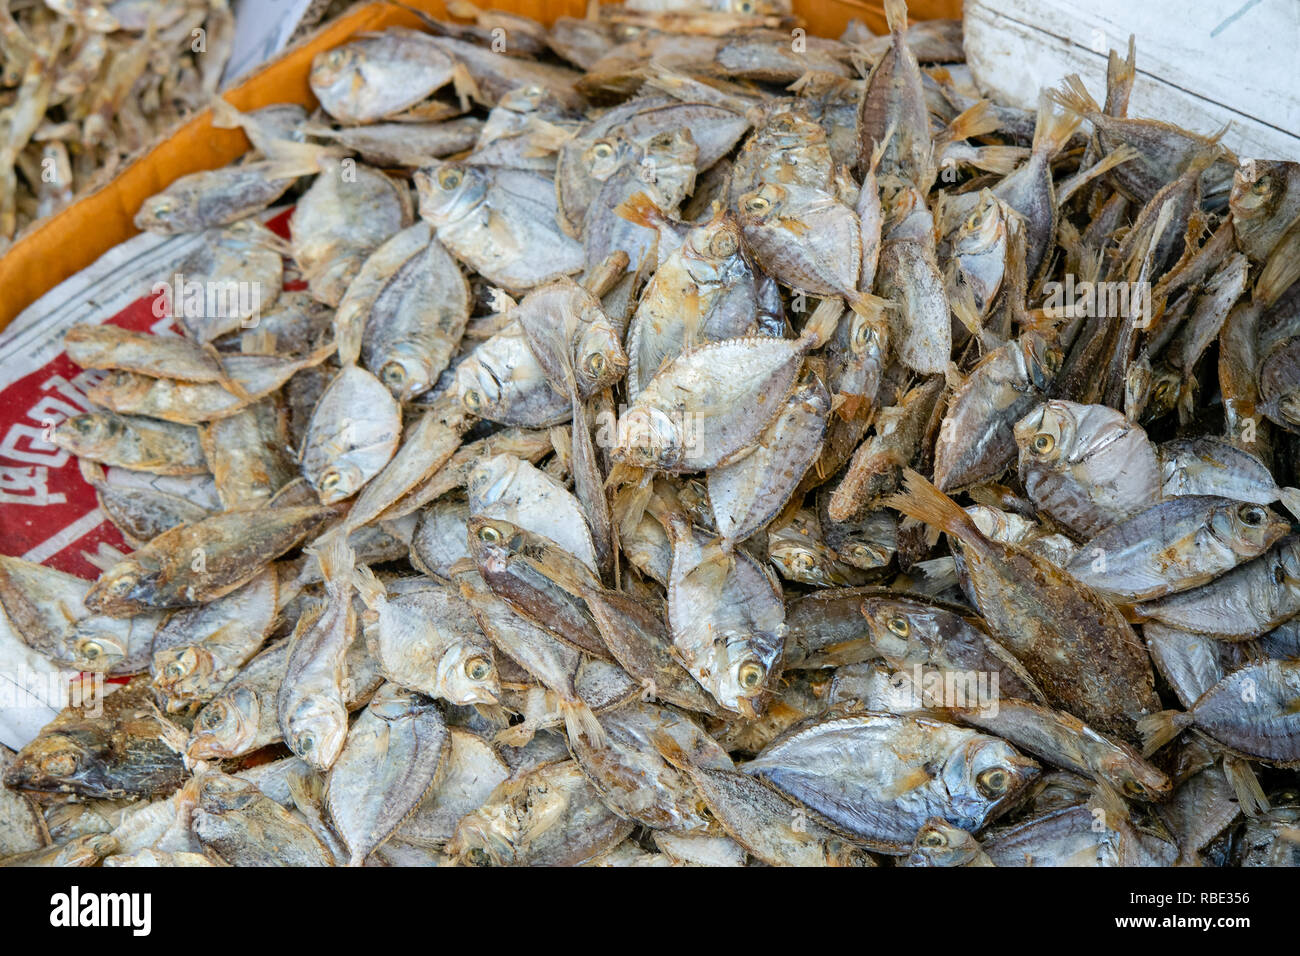 A basket of small sun dried salt water fish ready for sale. Stock Photo